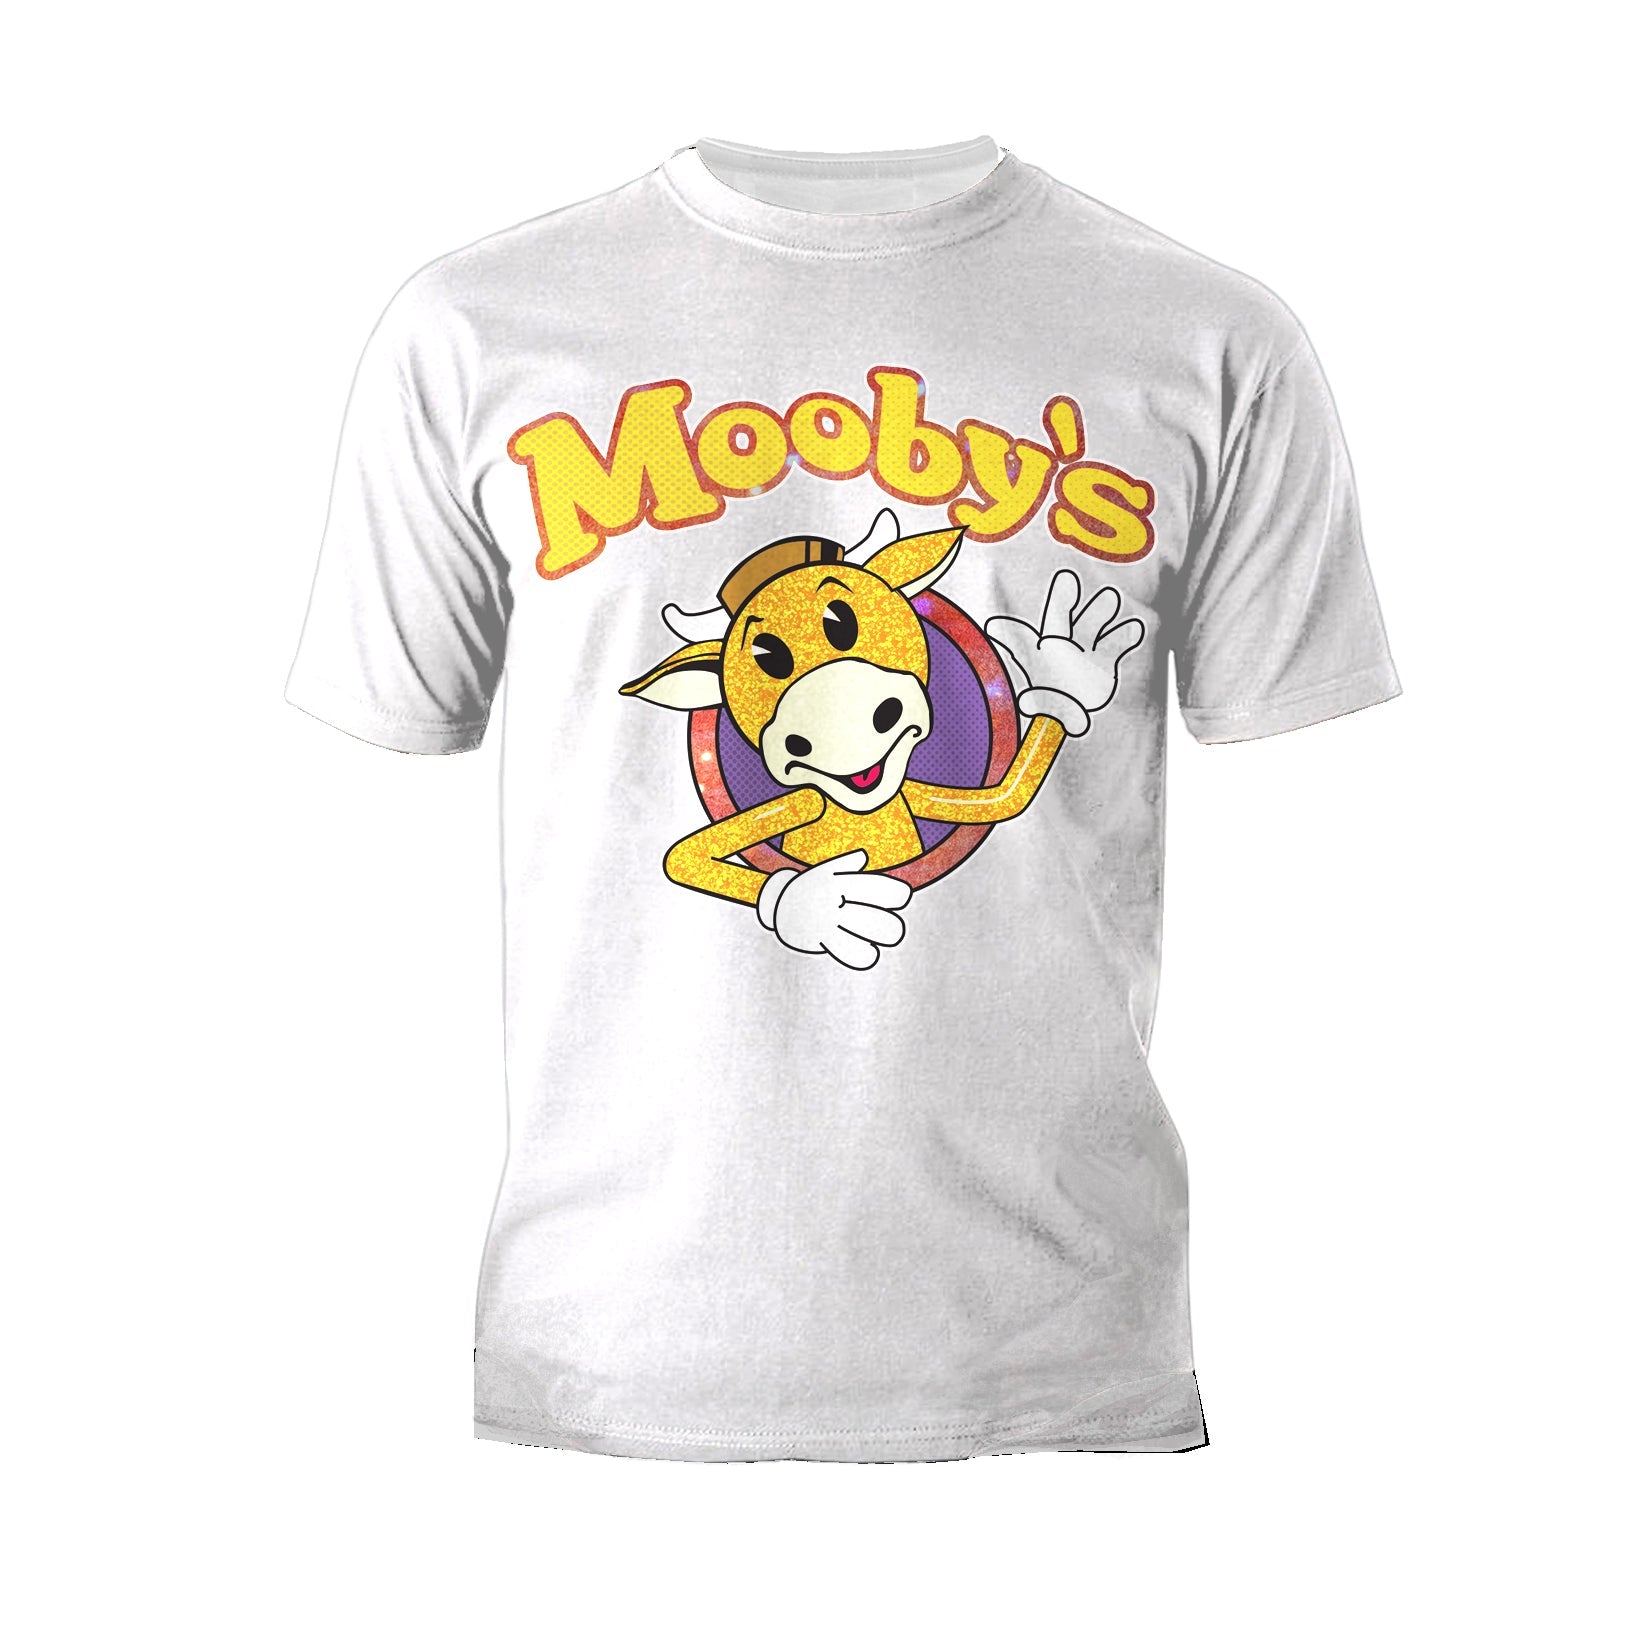 Kevin Smith View Askewniverse Mooby's Logo Golden Calf Edition Official Men's T-Shirt